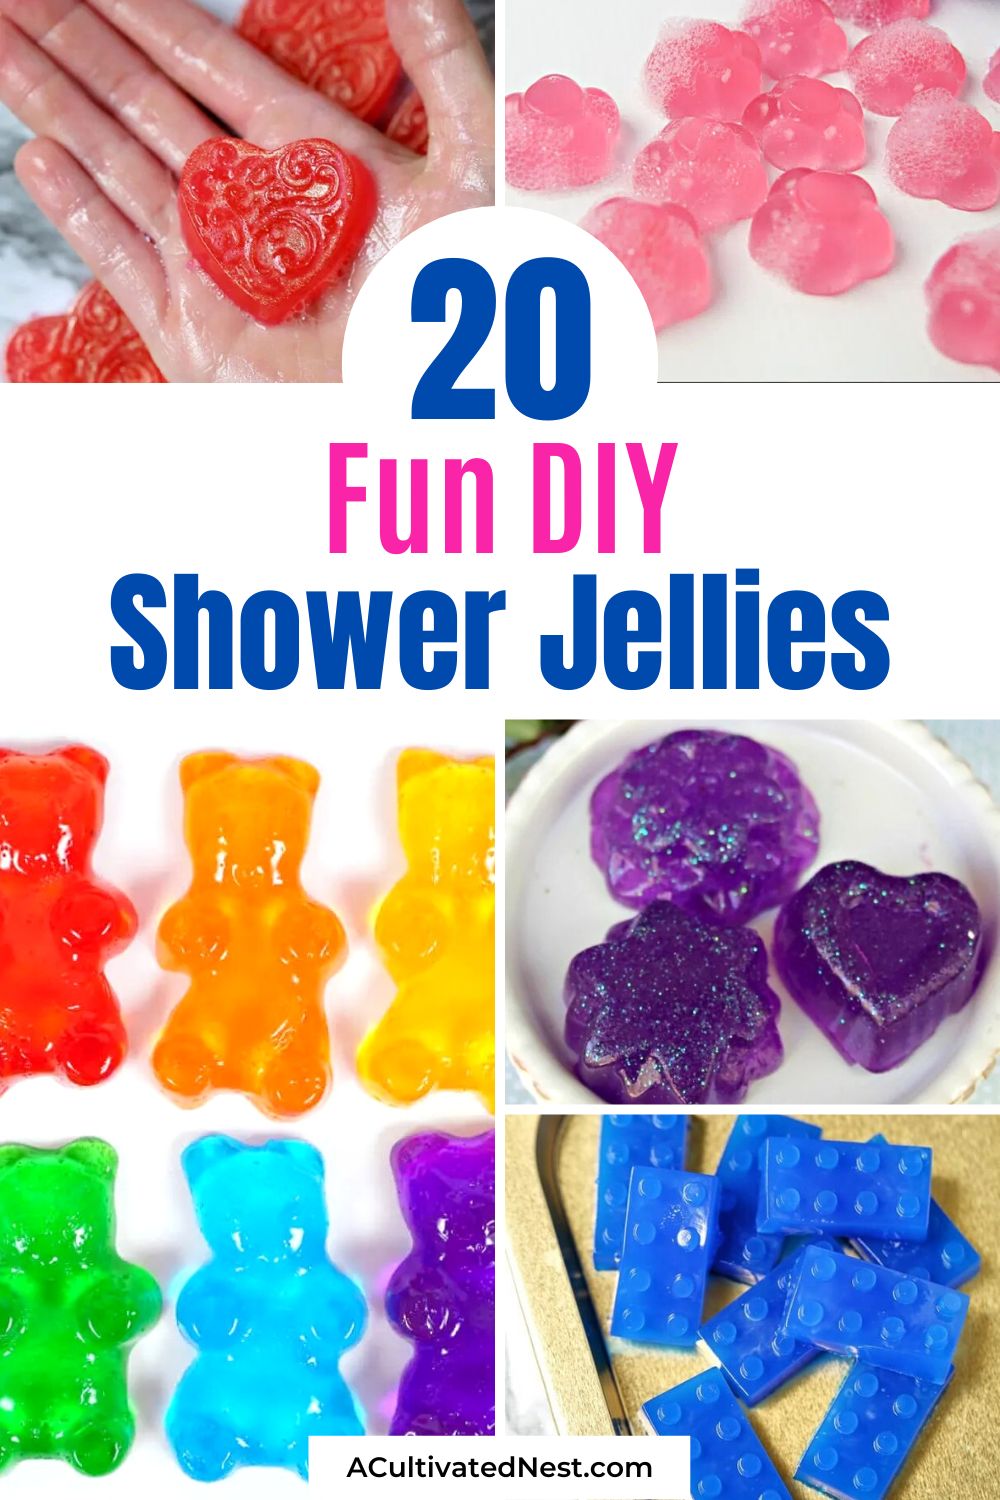 20 Fun DIY Shower Jellies- If you need a homemade gift, fun at-home project with the kids, or need to fill up your bathroom pantry, then you should check out these fun DIY shower jellies! | DIY jelly soaps, #crafts #homemadeGifts #showerJellies #diyBeauty #ACultivatedNest